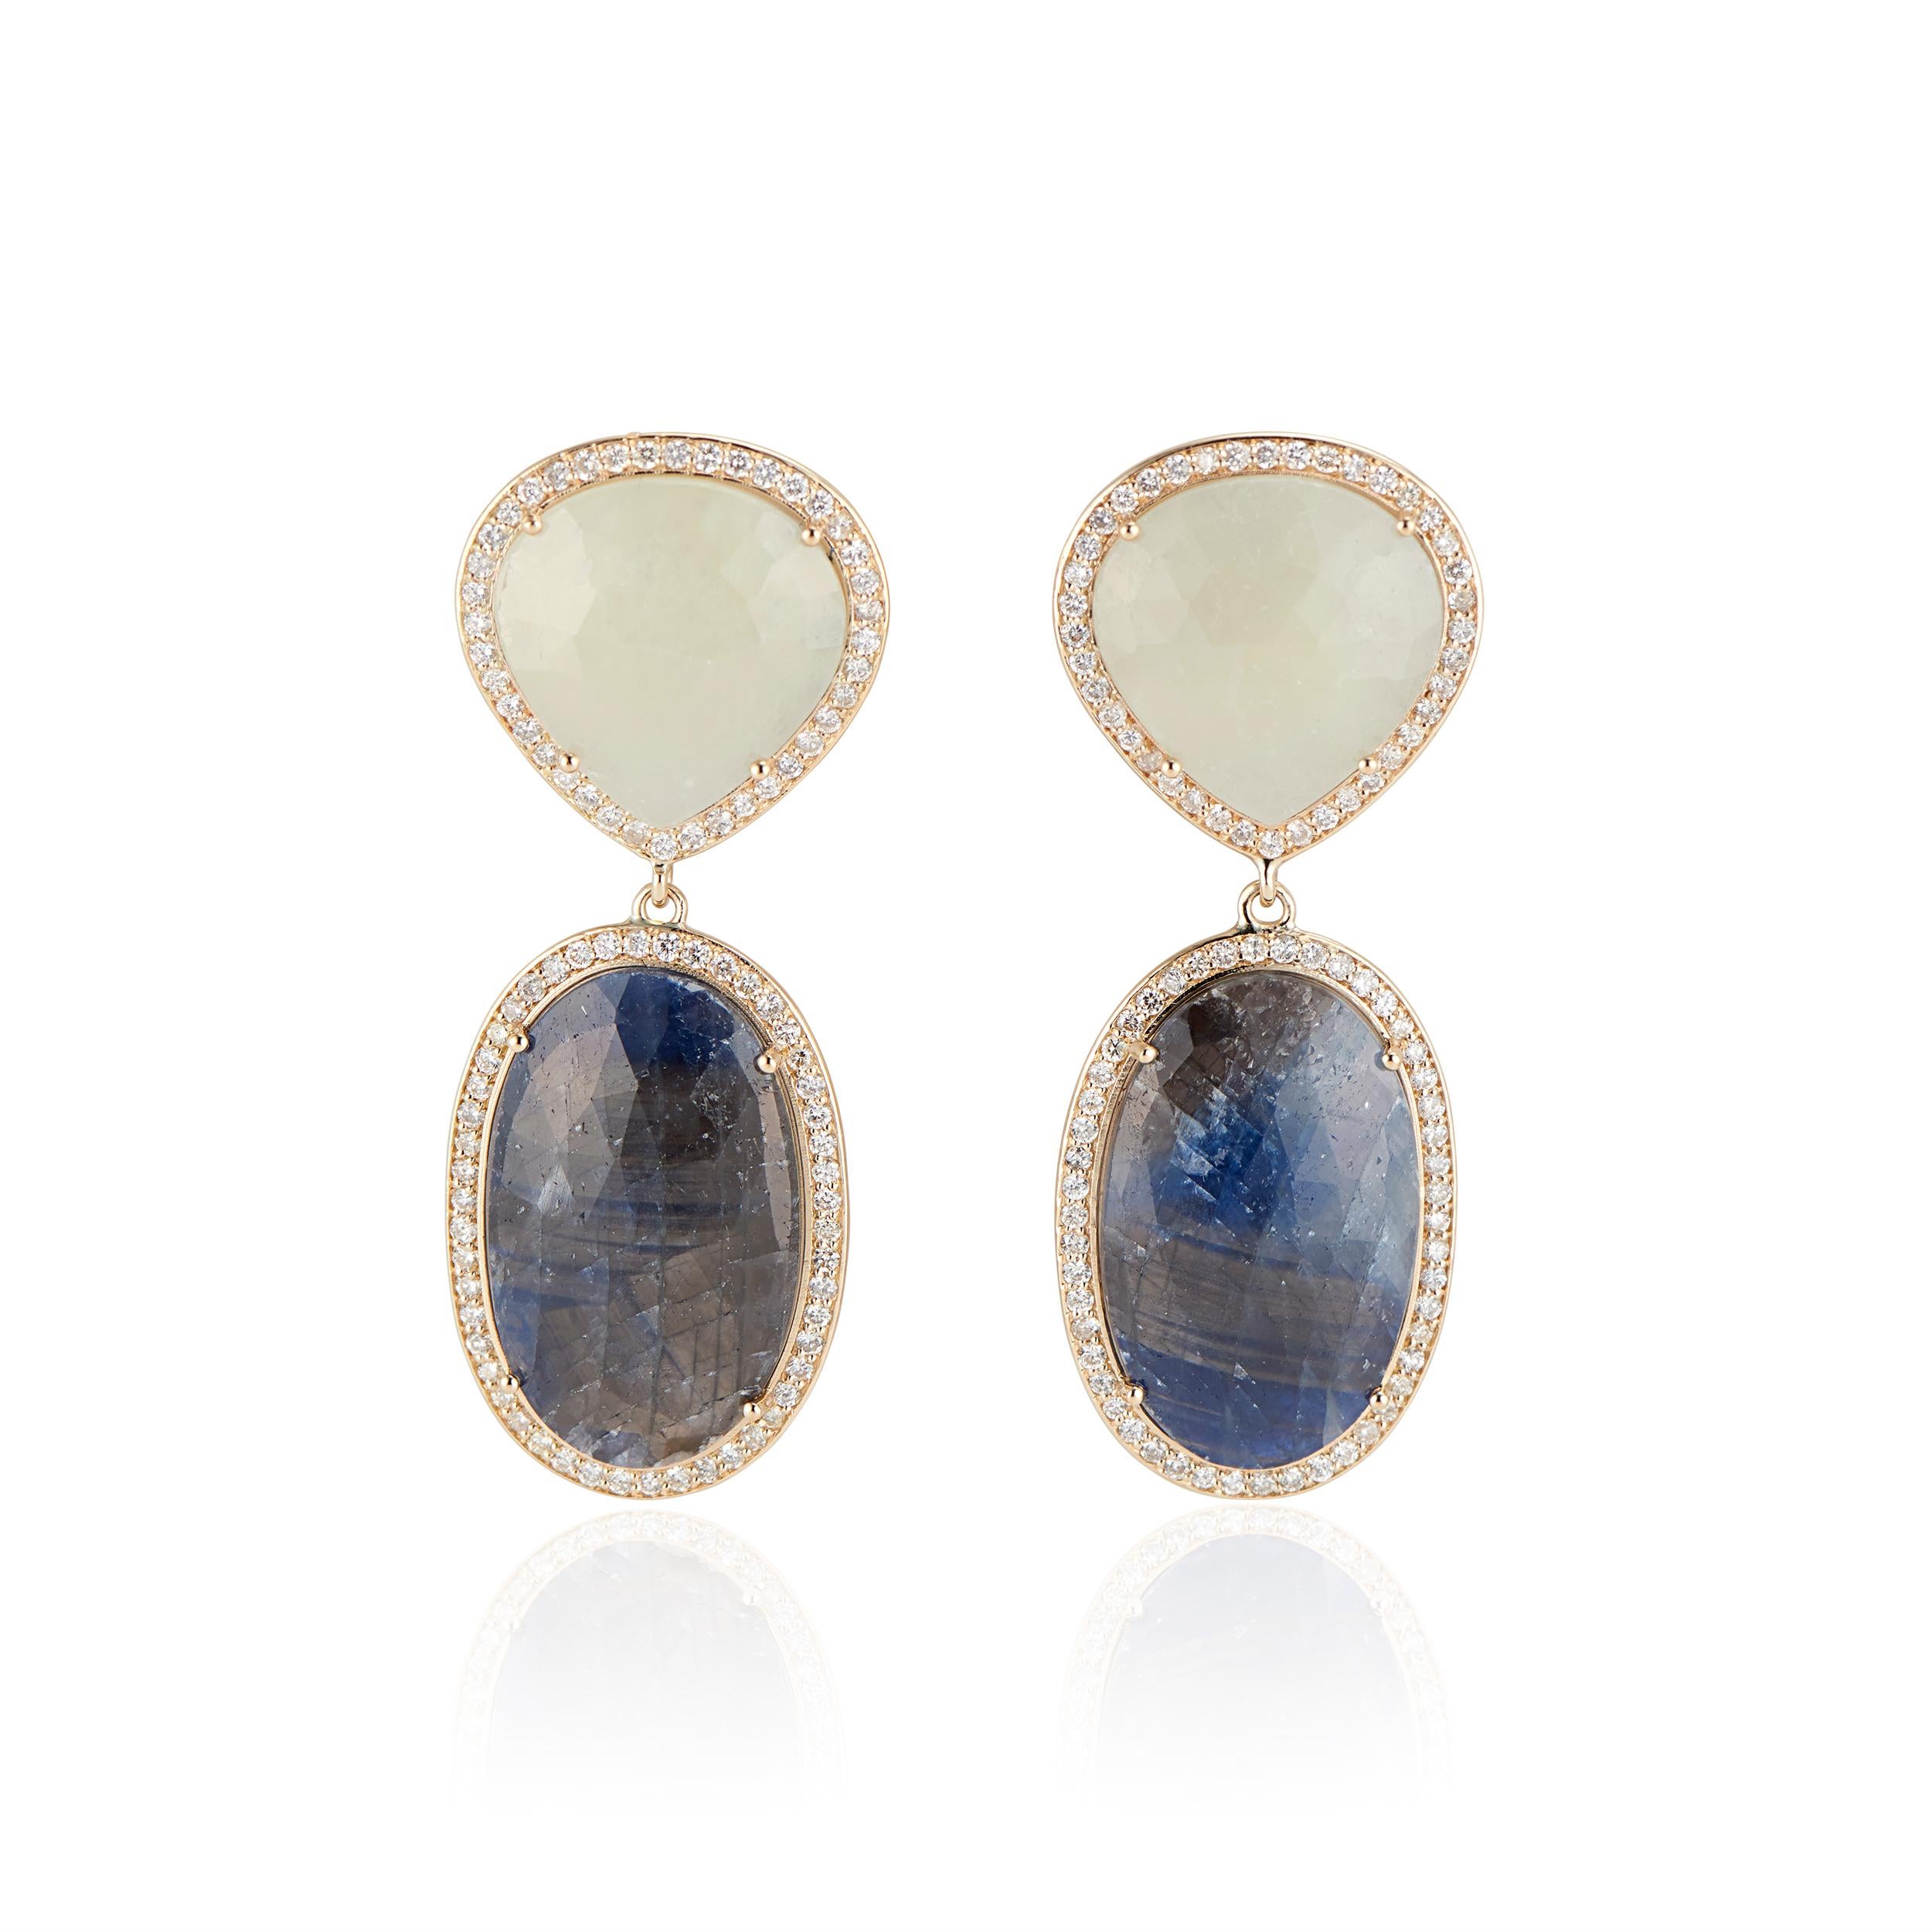 Truly one-of-a-kind beauty and luxury: 14k Yellow Gold Blue Sapphire Oval Shaped Slice and Cream Sapphire Slice with Diamond Halo Earrings

Each earring features a captivating blue sapphire oval-shaped slice and a cream sapphire slice, both